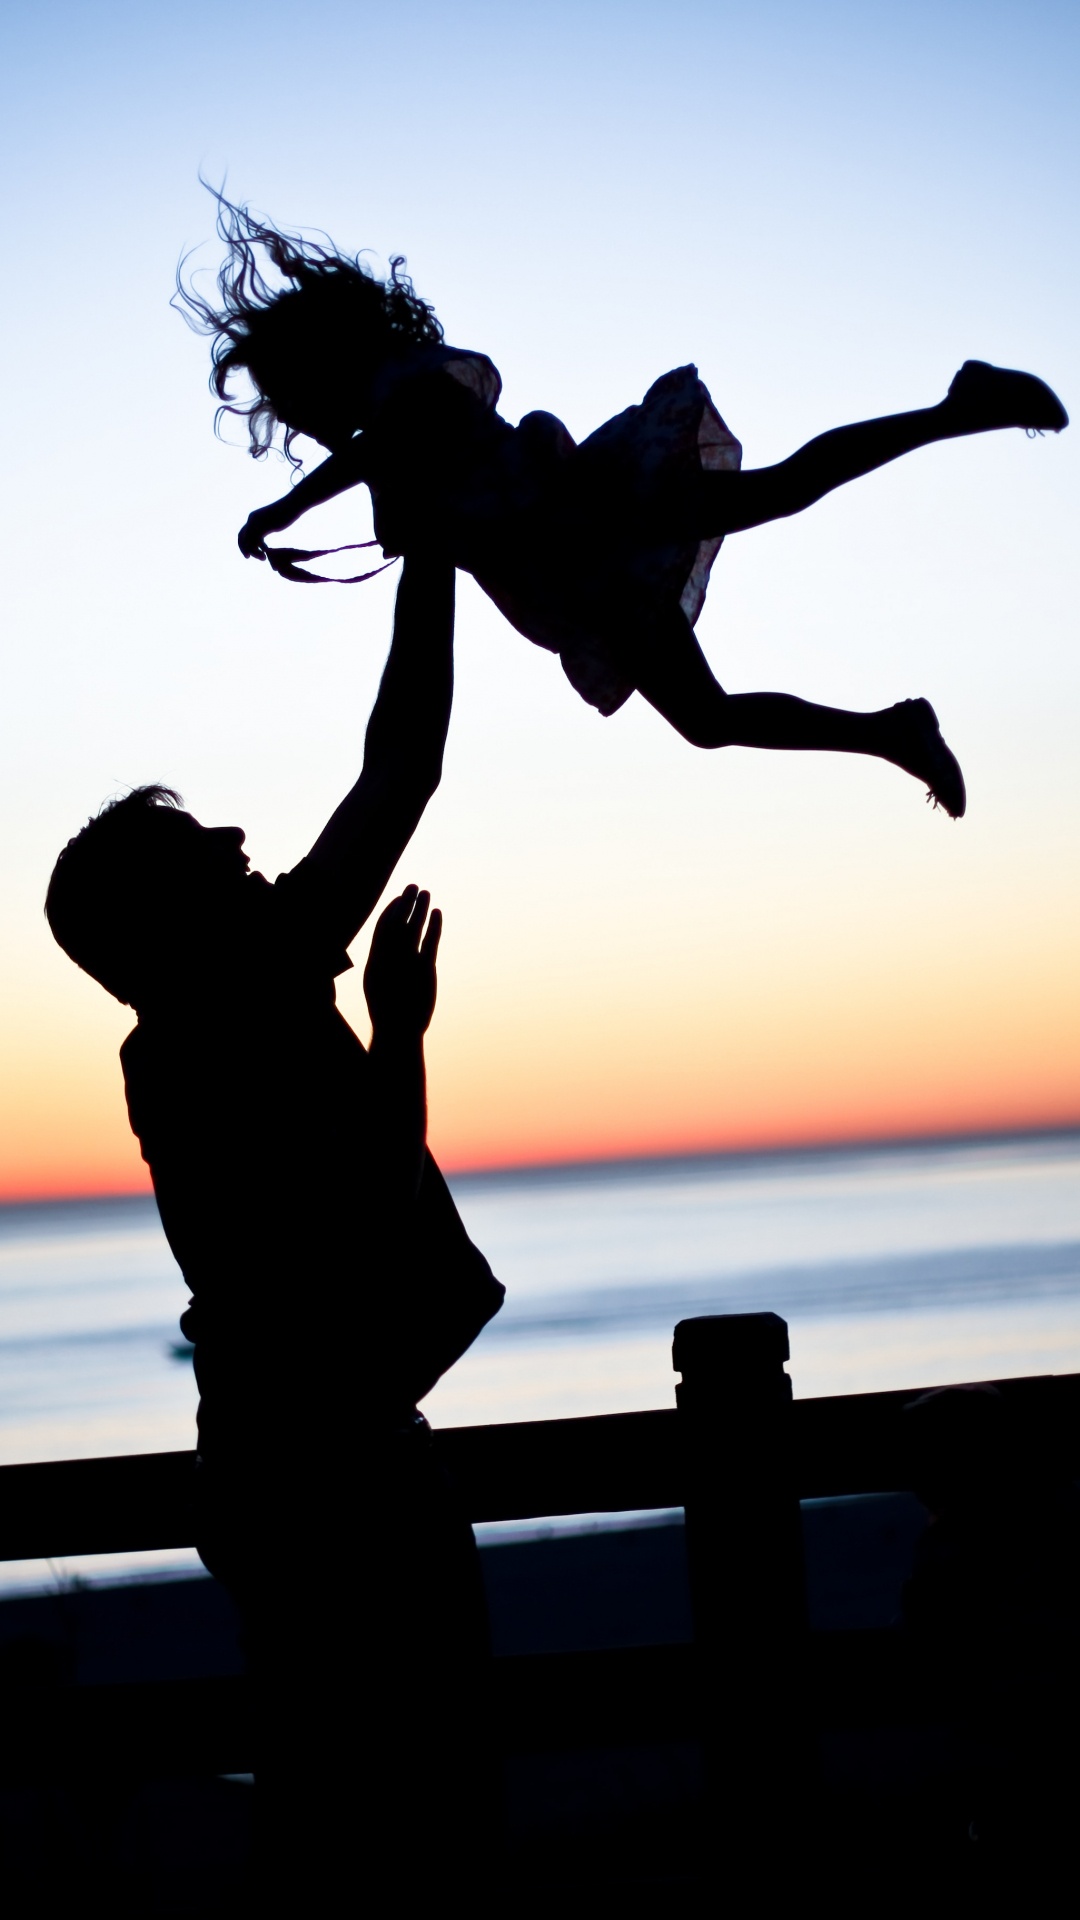 Father, Daughter, Family, People in Nature, Jumping. Wallpaper in 1080x1920 Resolution